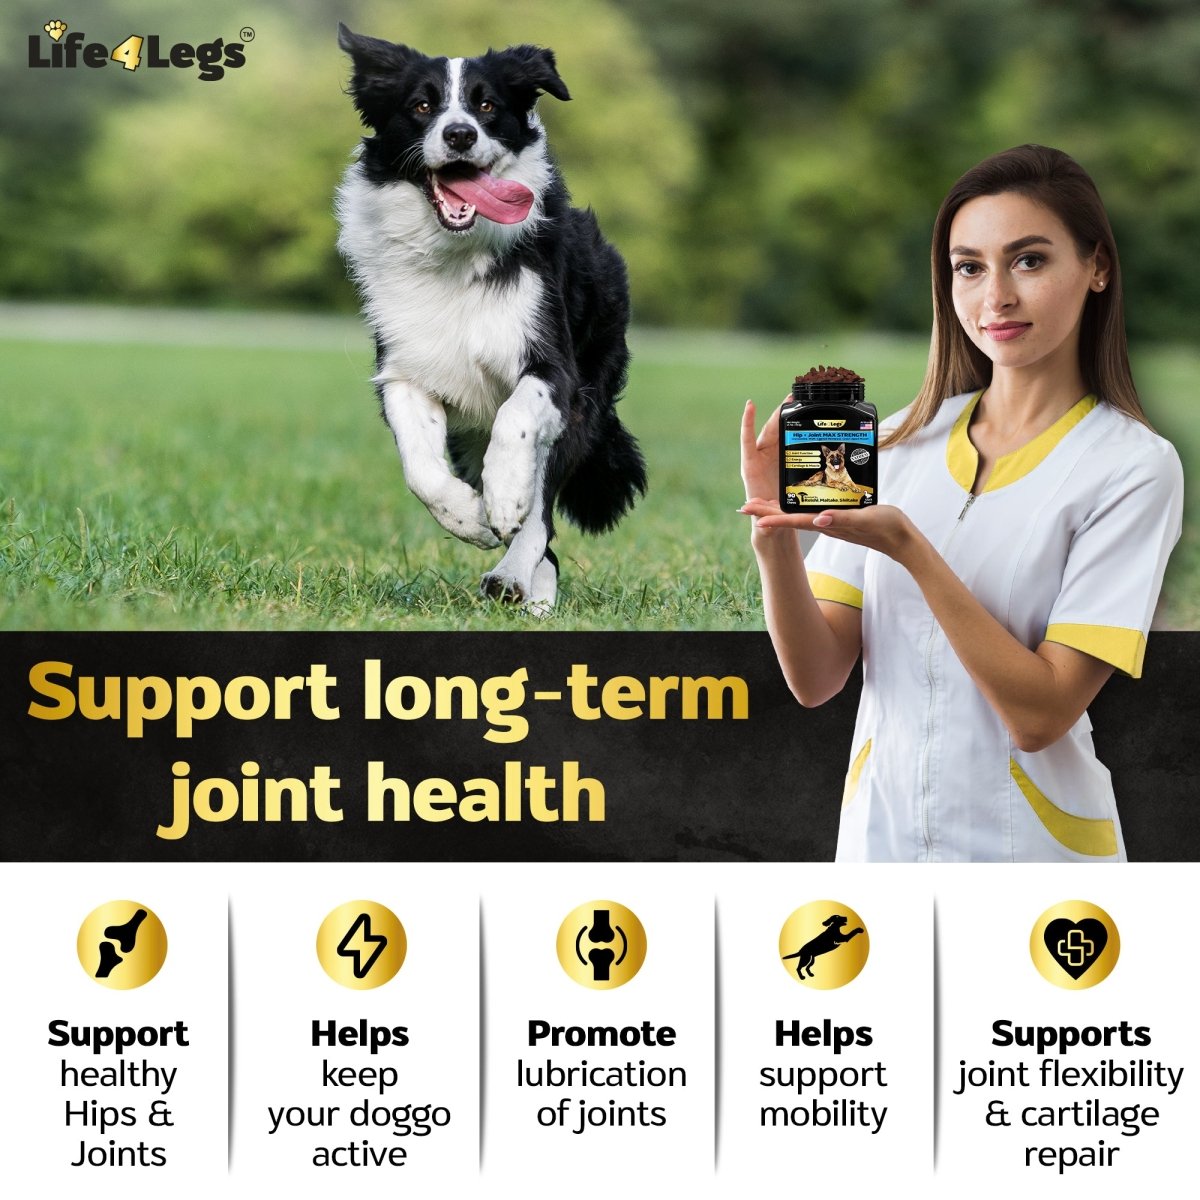 90 Soft chews Hip and Joint Supplement for Dogs - Dog Joint Pain Relief Treats - Glucosamine, Chondroitin, Turmeric, MSM - Hemp oil Mobility Supplement with Green Lipped Mussels - Life4legs